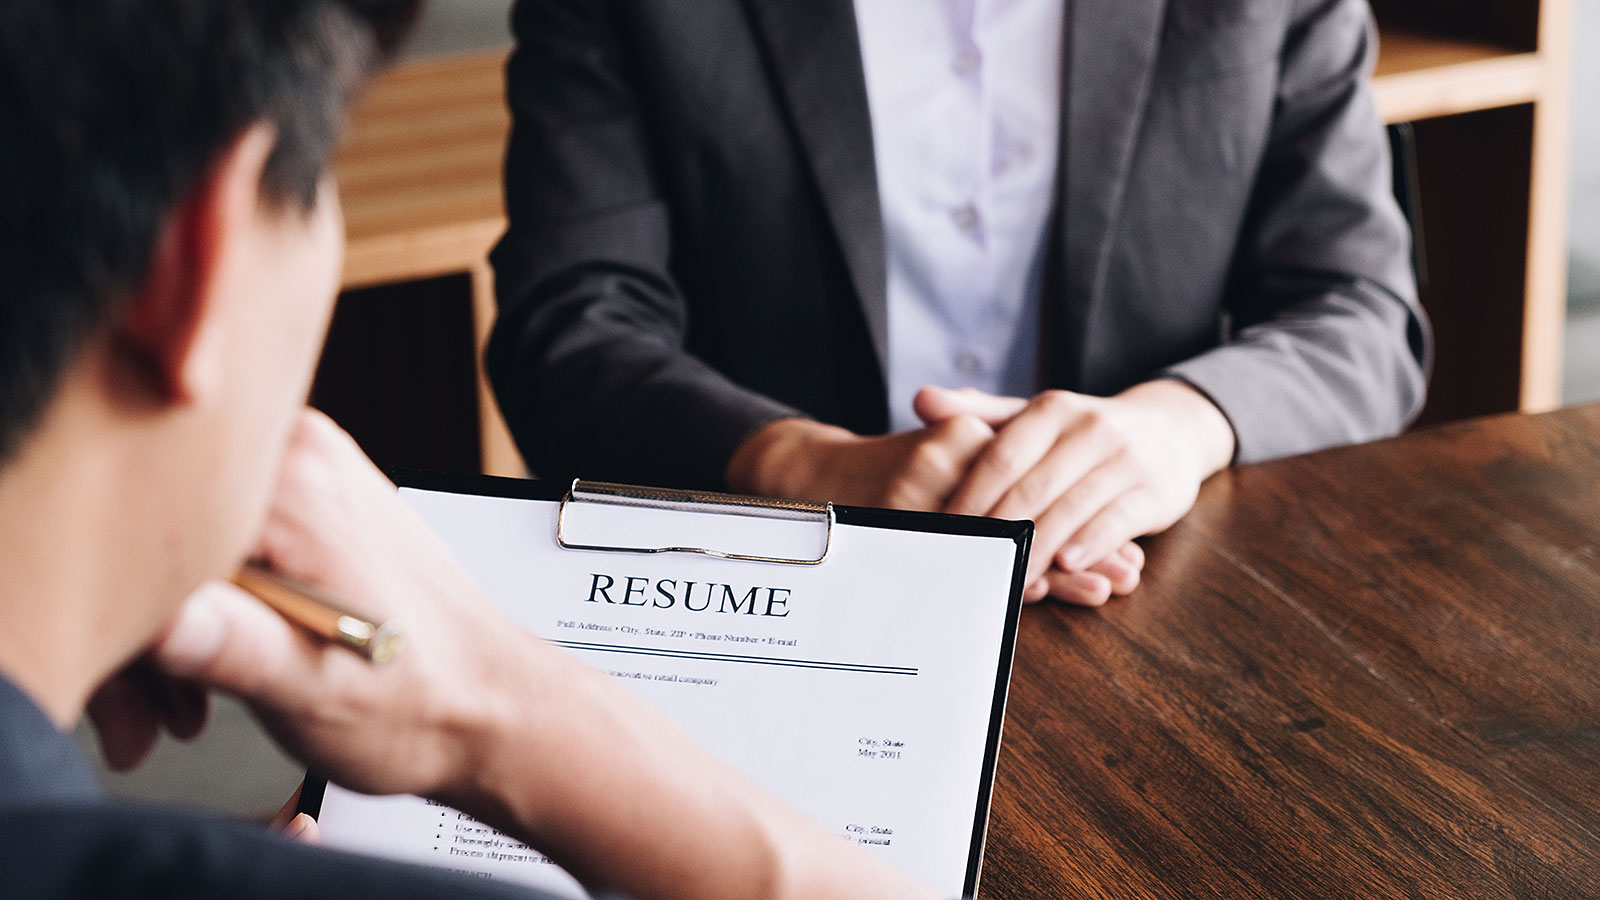 Professional resume building services: Is it worth hiring someone to write your resume?